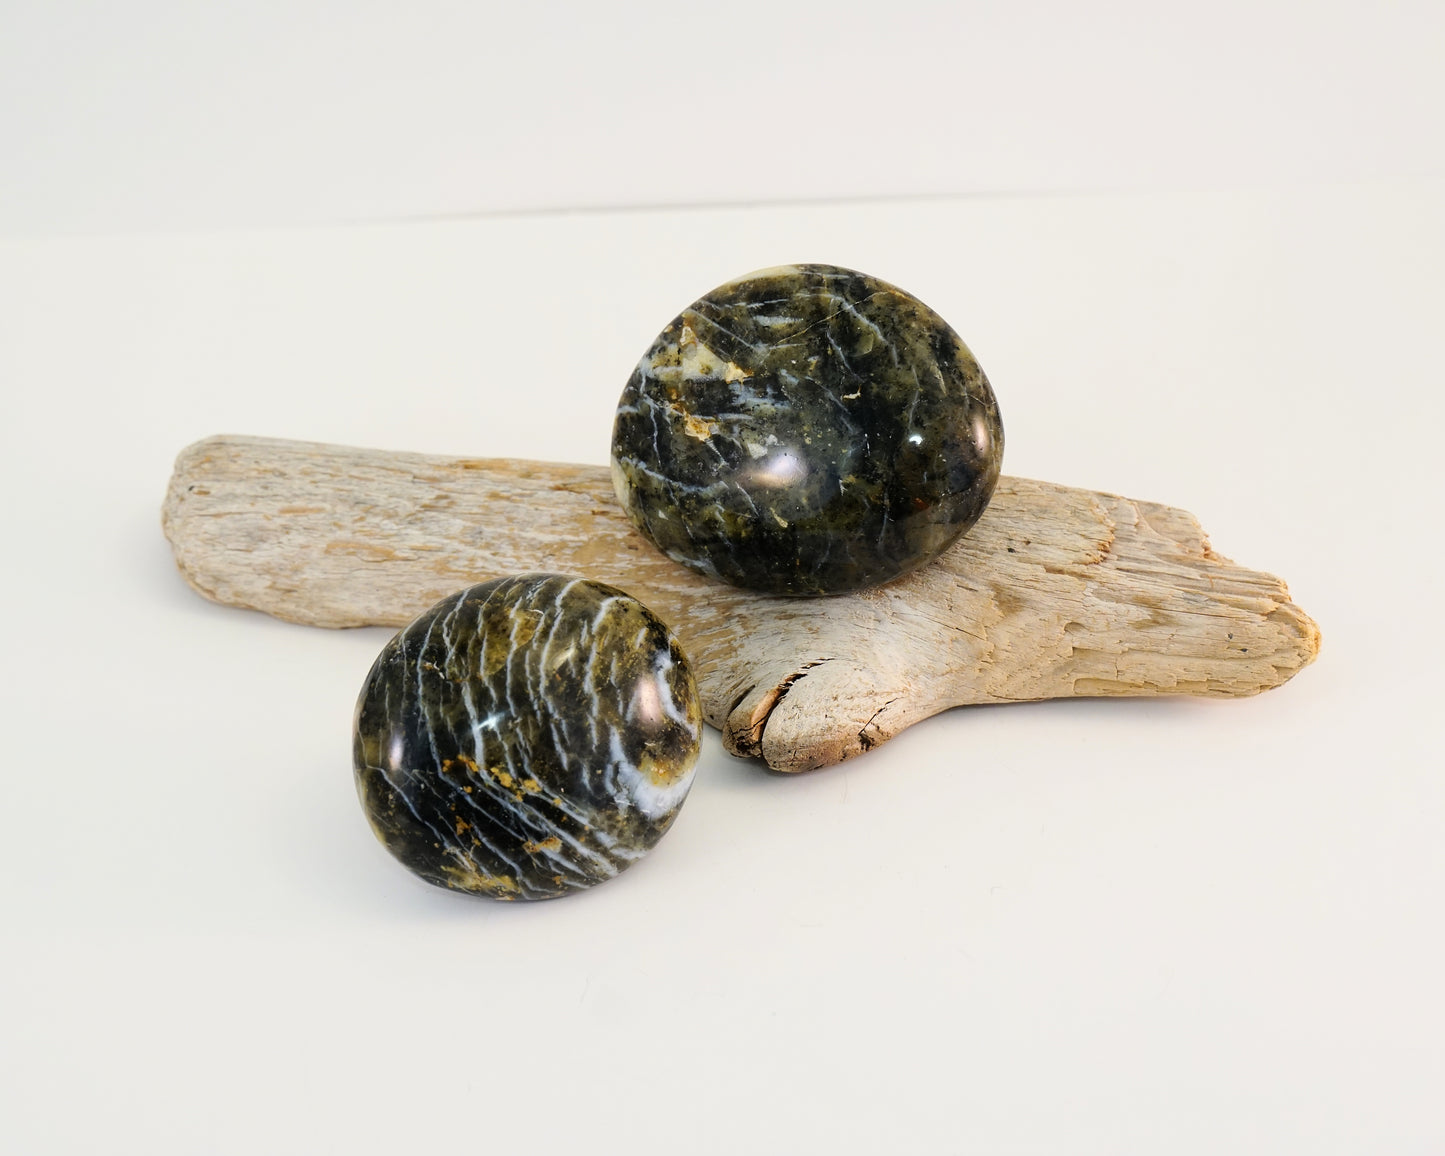 Curtain Rod Finial Pair - Green Dendritic Opal Polished Stones